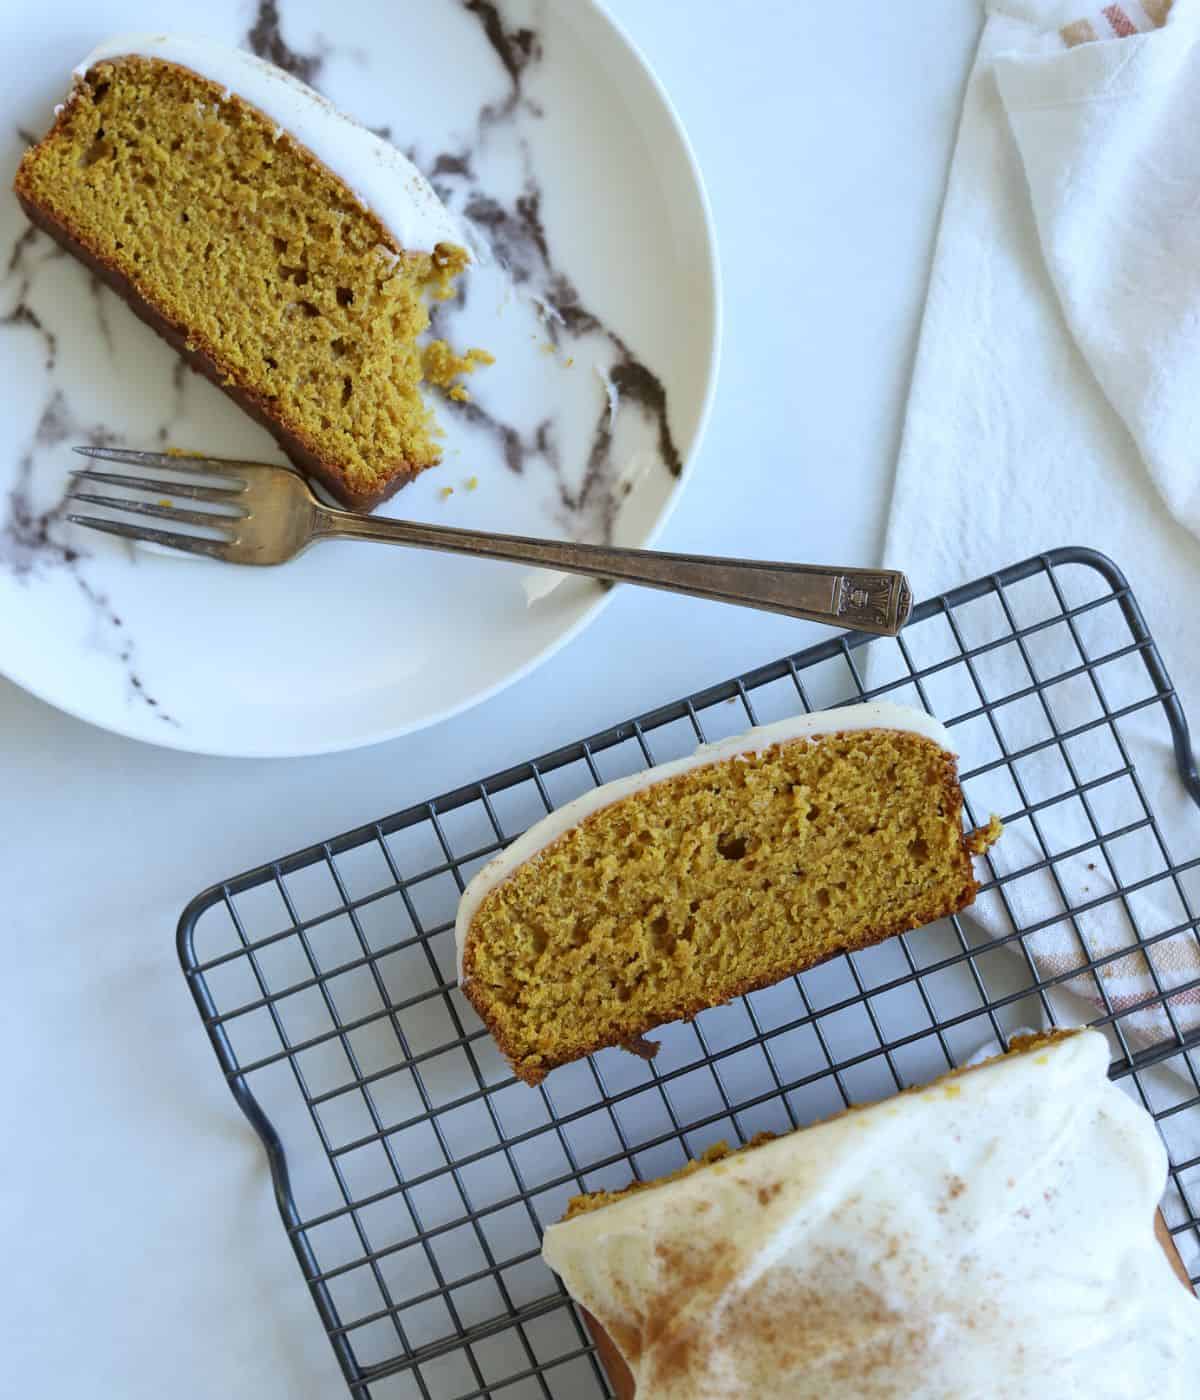 pumpkin bread sliced on a baking tray with a slice on a plate